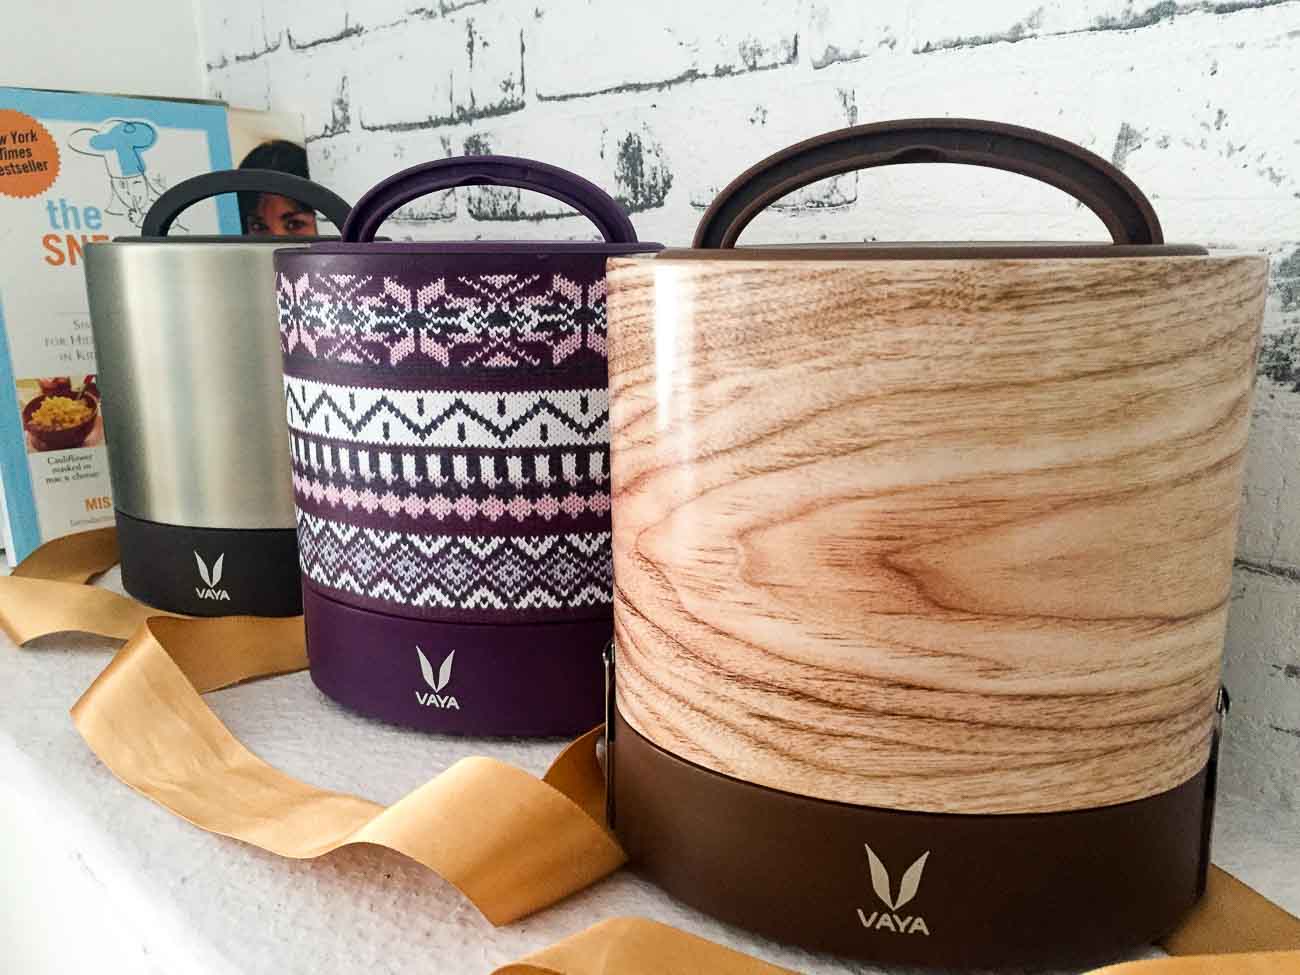 Carry Your Lunch In Style With Vaya Tyffyn by Archana's Kitchen